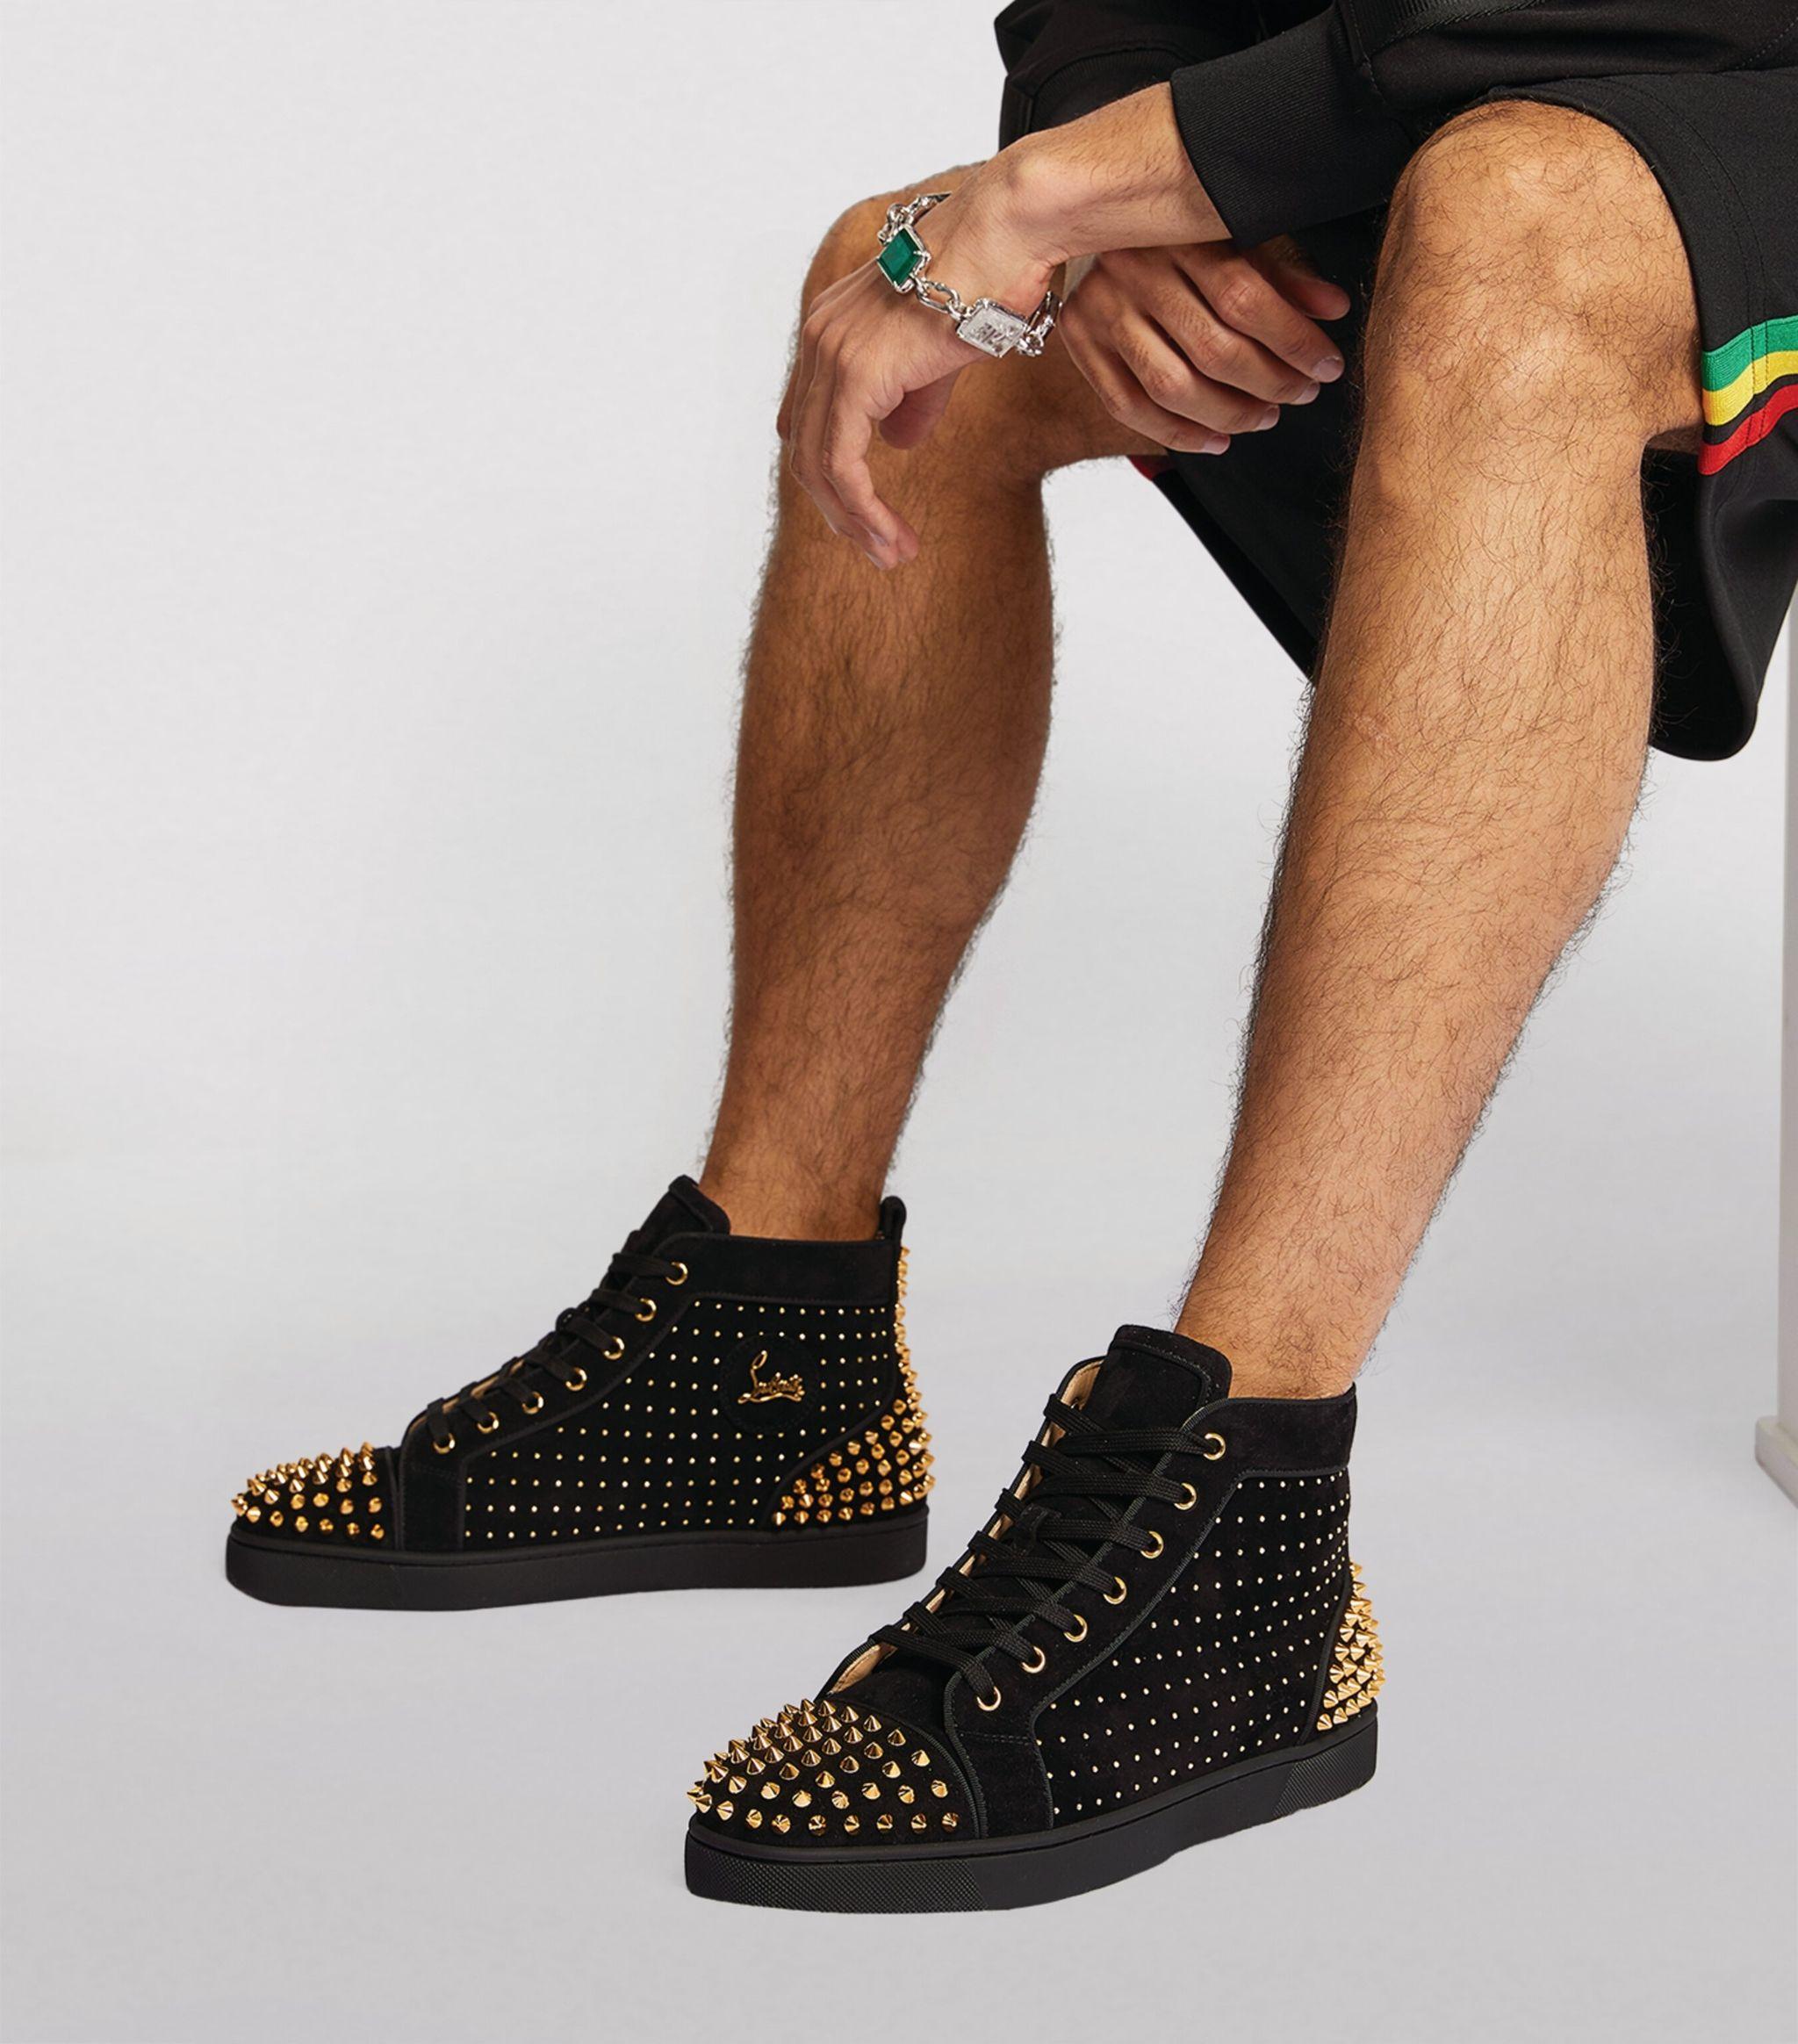 Christian Louboutin Lou Spikes 2 Plume Suede High-top Sneakers in